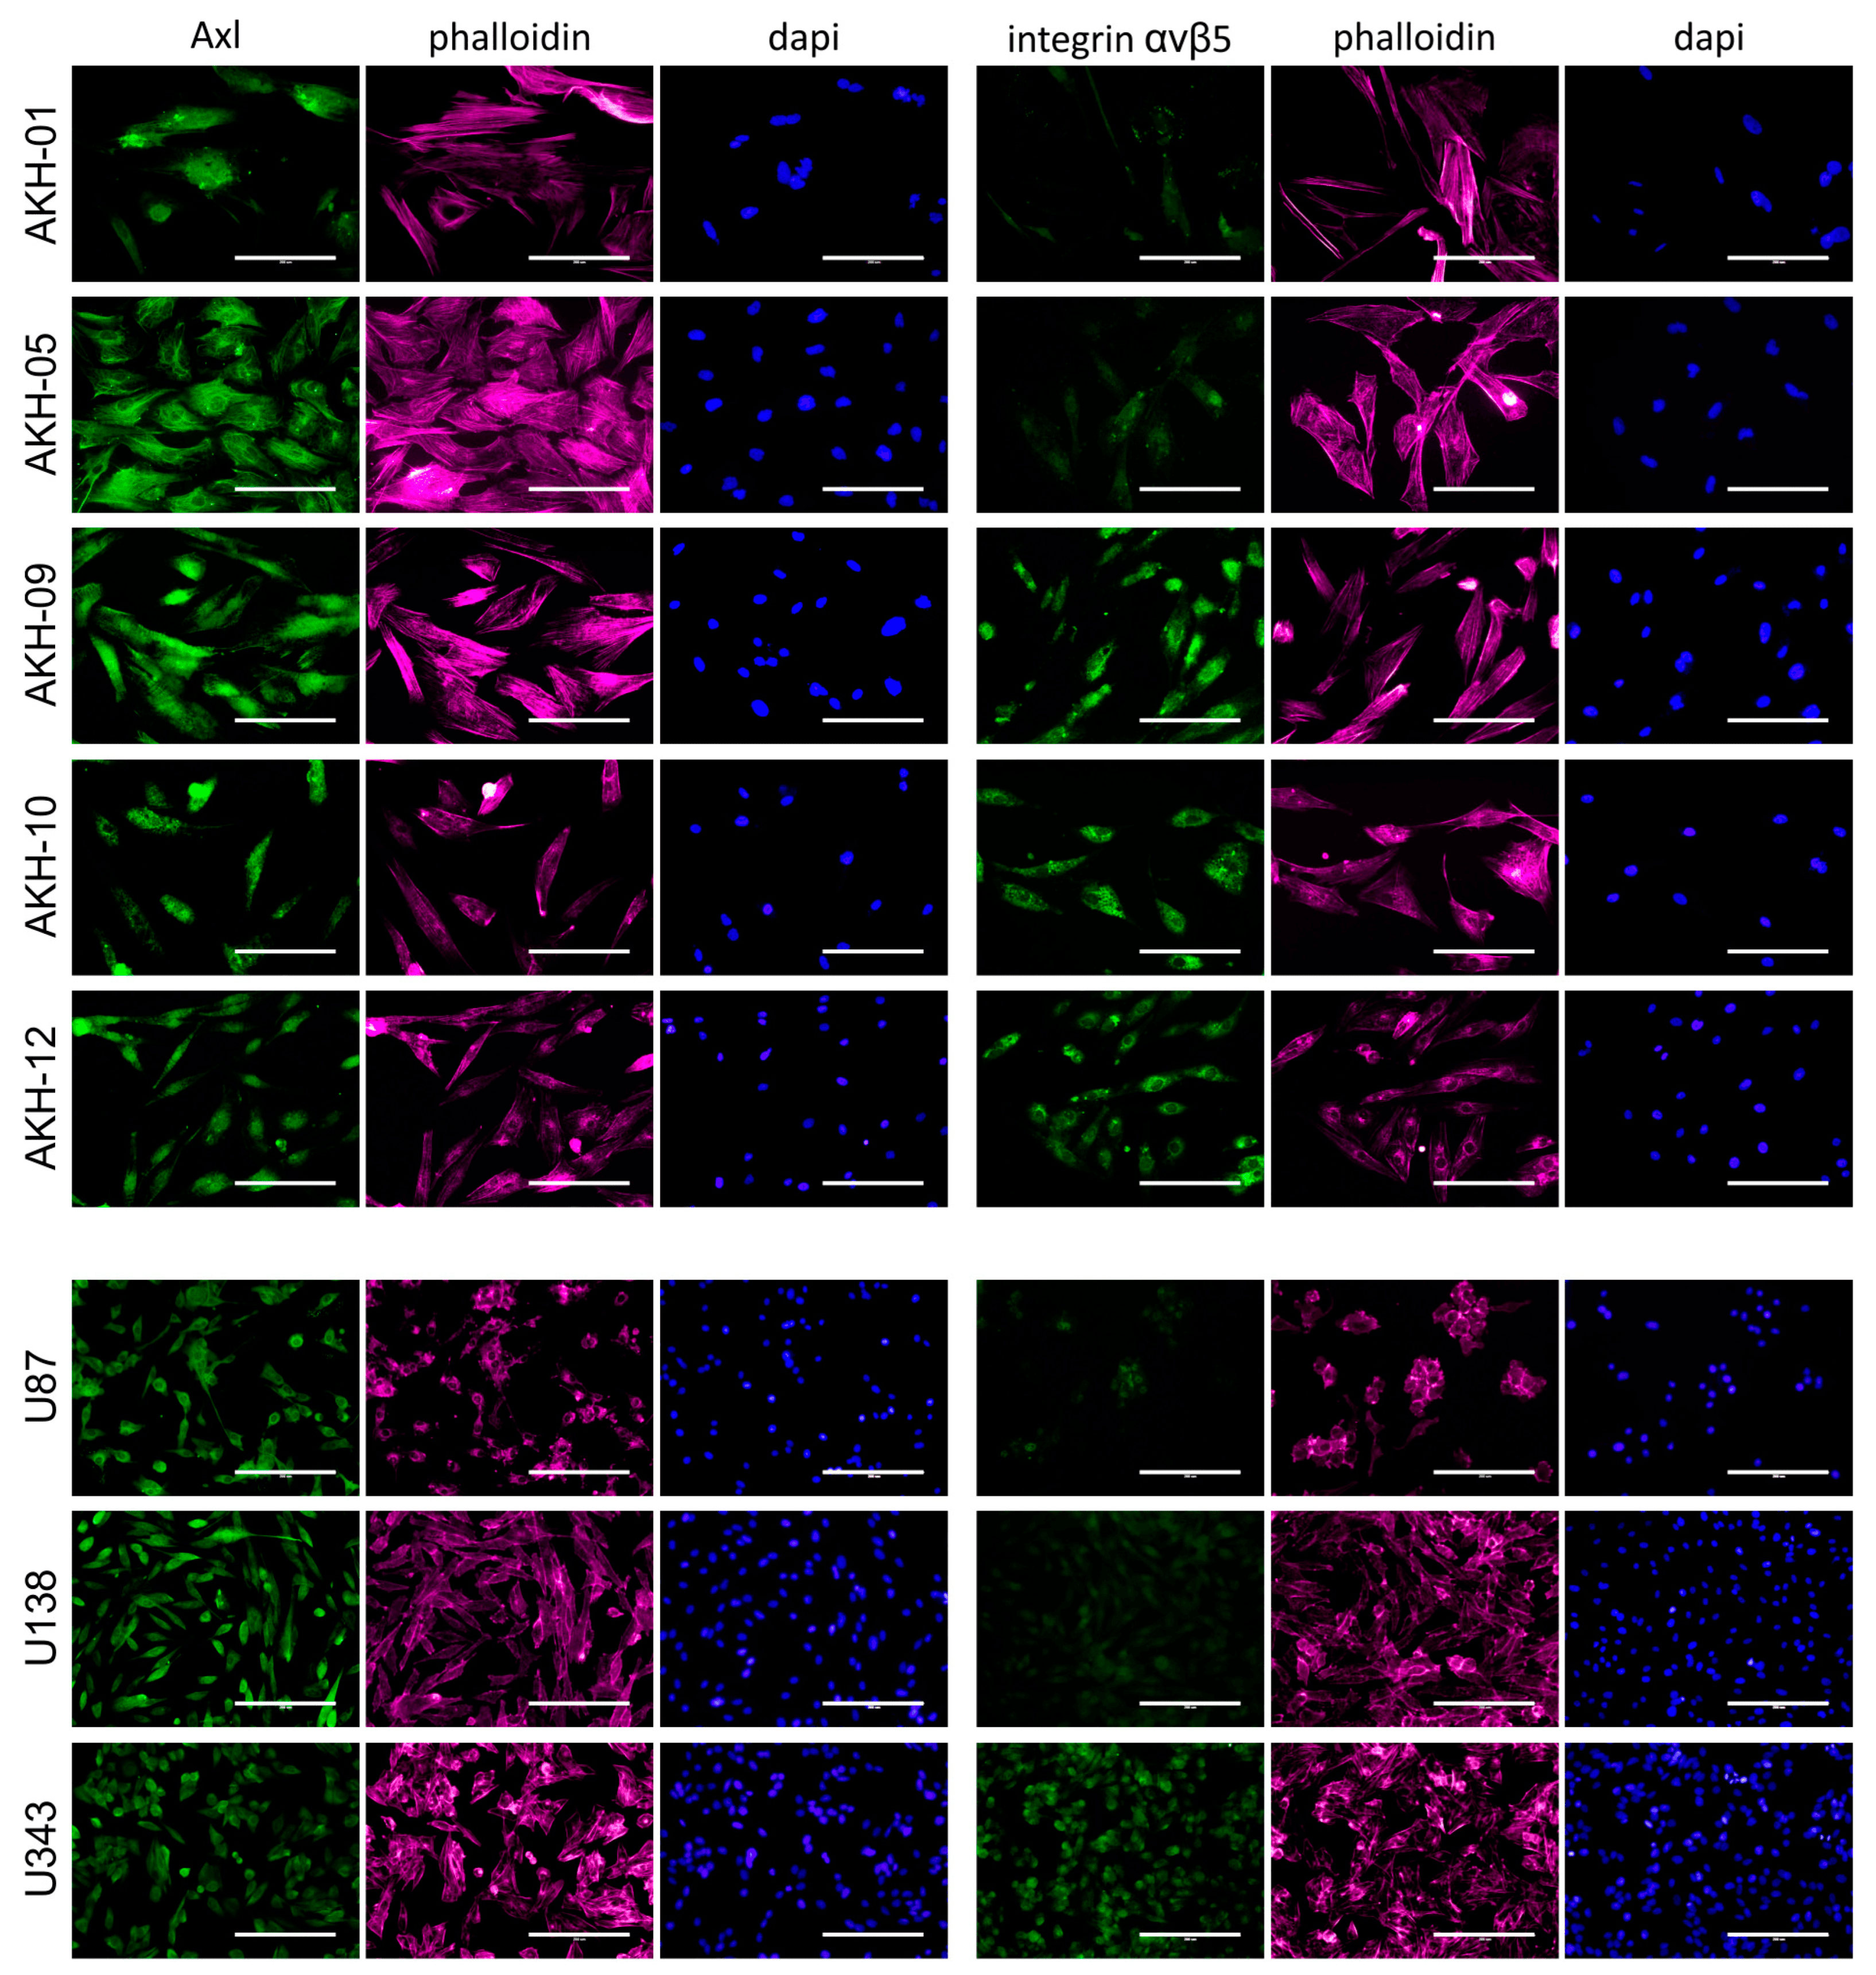 Axl and integrin αvβ5 expression in AKH tumor cells and glioma cell lines. Cells were cultured on glass slides, fixed with formalin, and then post-treated with Triton-X100. iFluor-555 phalloidin (red) and DAPI (blue) were used to visualize the cells and their nuclei. Bound Axl- and integrin αvβ5-specific monoclonal antibodies were detected by using a secondary anti-mouse antibody-Alexa 488 conjugate (green). Scale = 200 µm. Source: <b>Isolation of Cells from Glioblastoma Multiforme Grade 4 Tumors for Infection with Zika Virus prME and ME Pseudotyped HIV-1</b> by Pöhlking <em>et. al.</em>, <em>Int. J. Mol. Sci.</em> Feb. 2023.